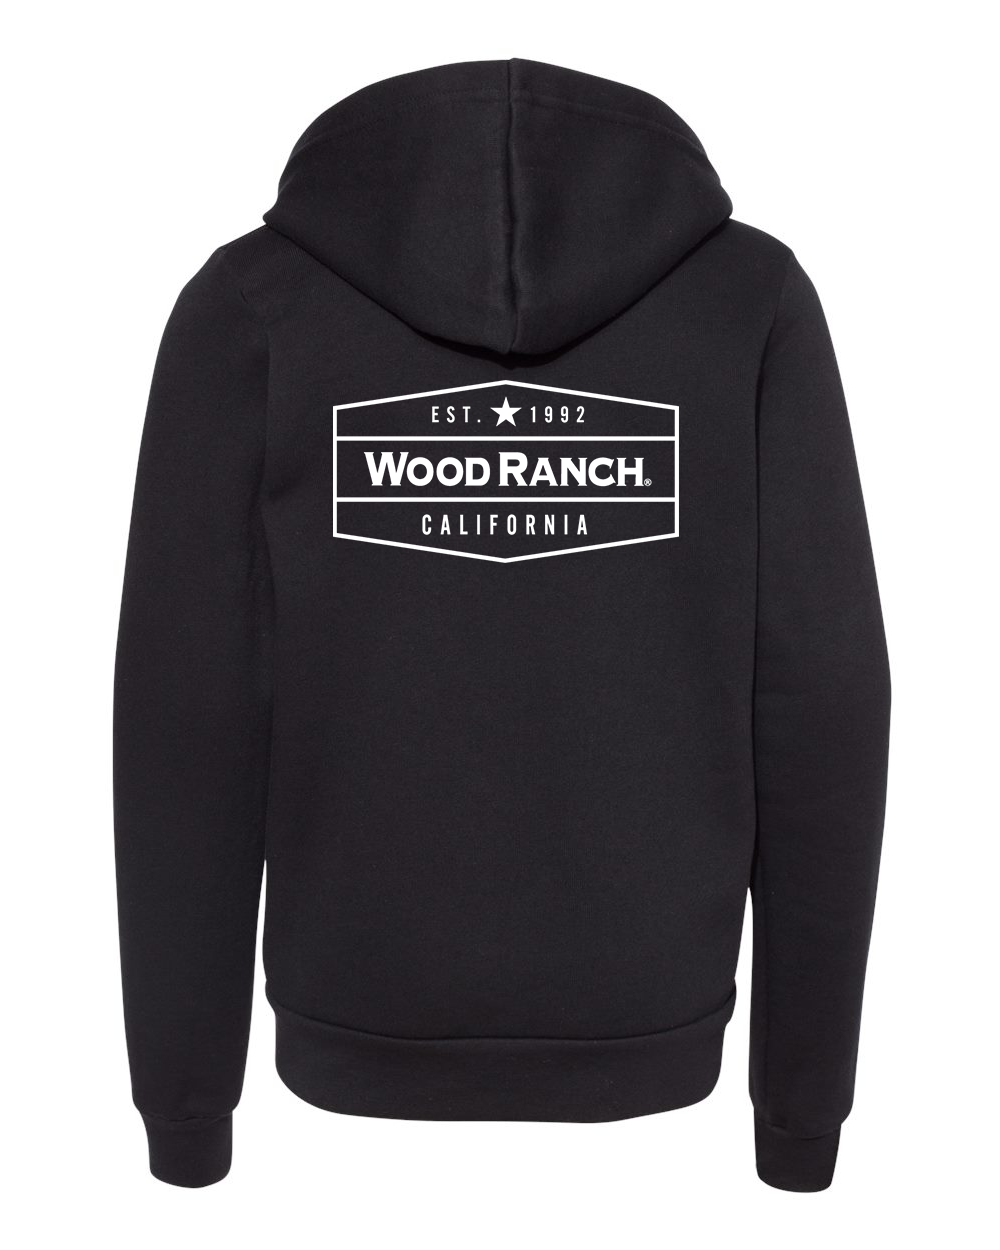 About the product. Backside of black zipper hoodie style garment. White Wood Ranch emblem logo in the center. This is a youth size.